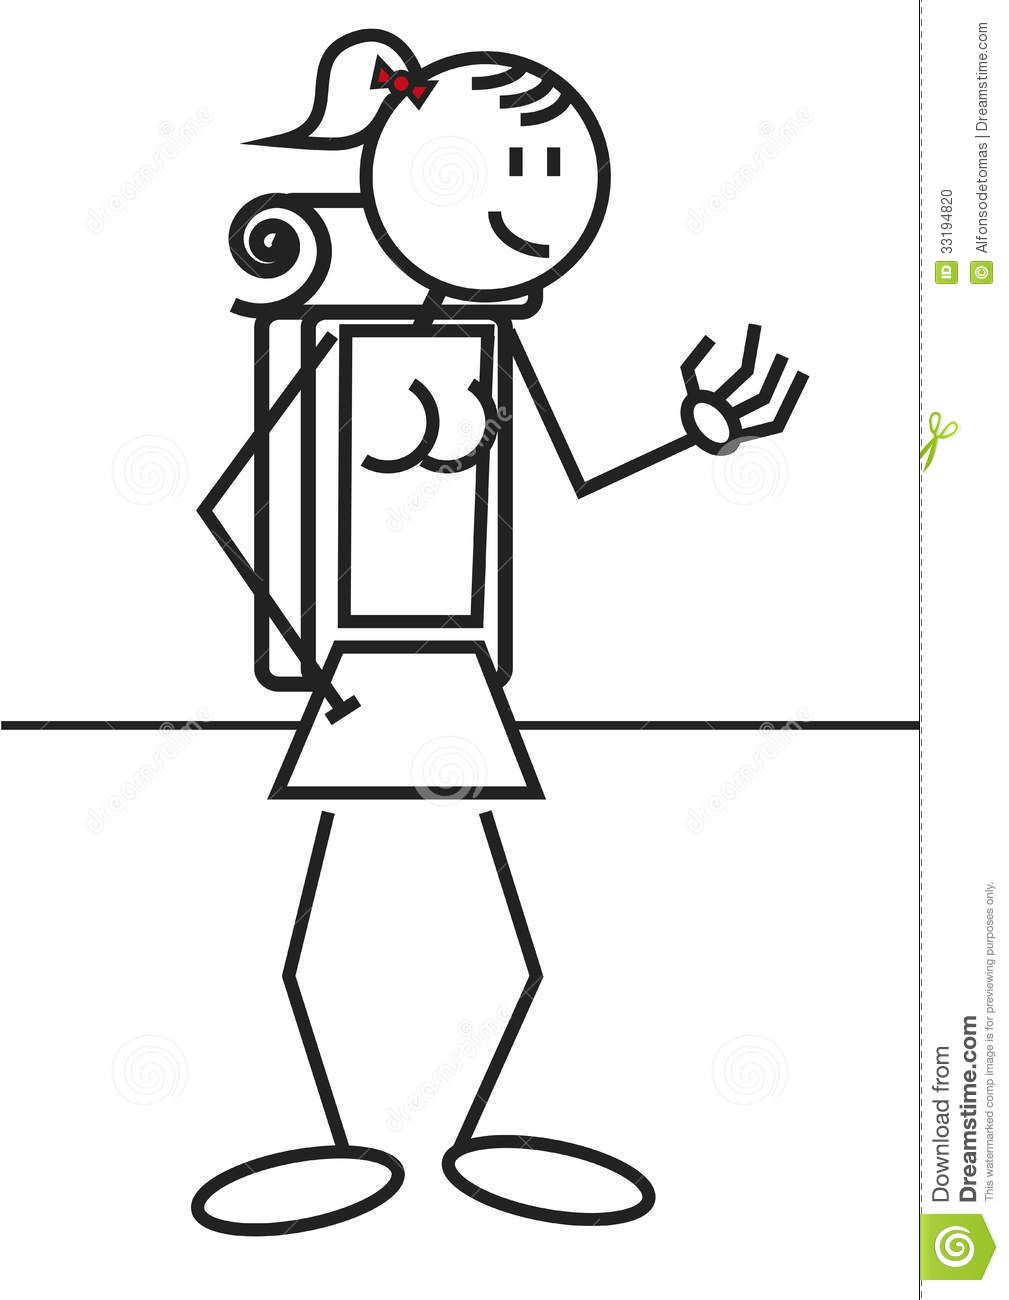 13 Vector Stick Figures Girl Images